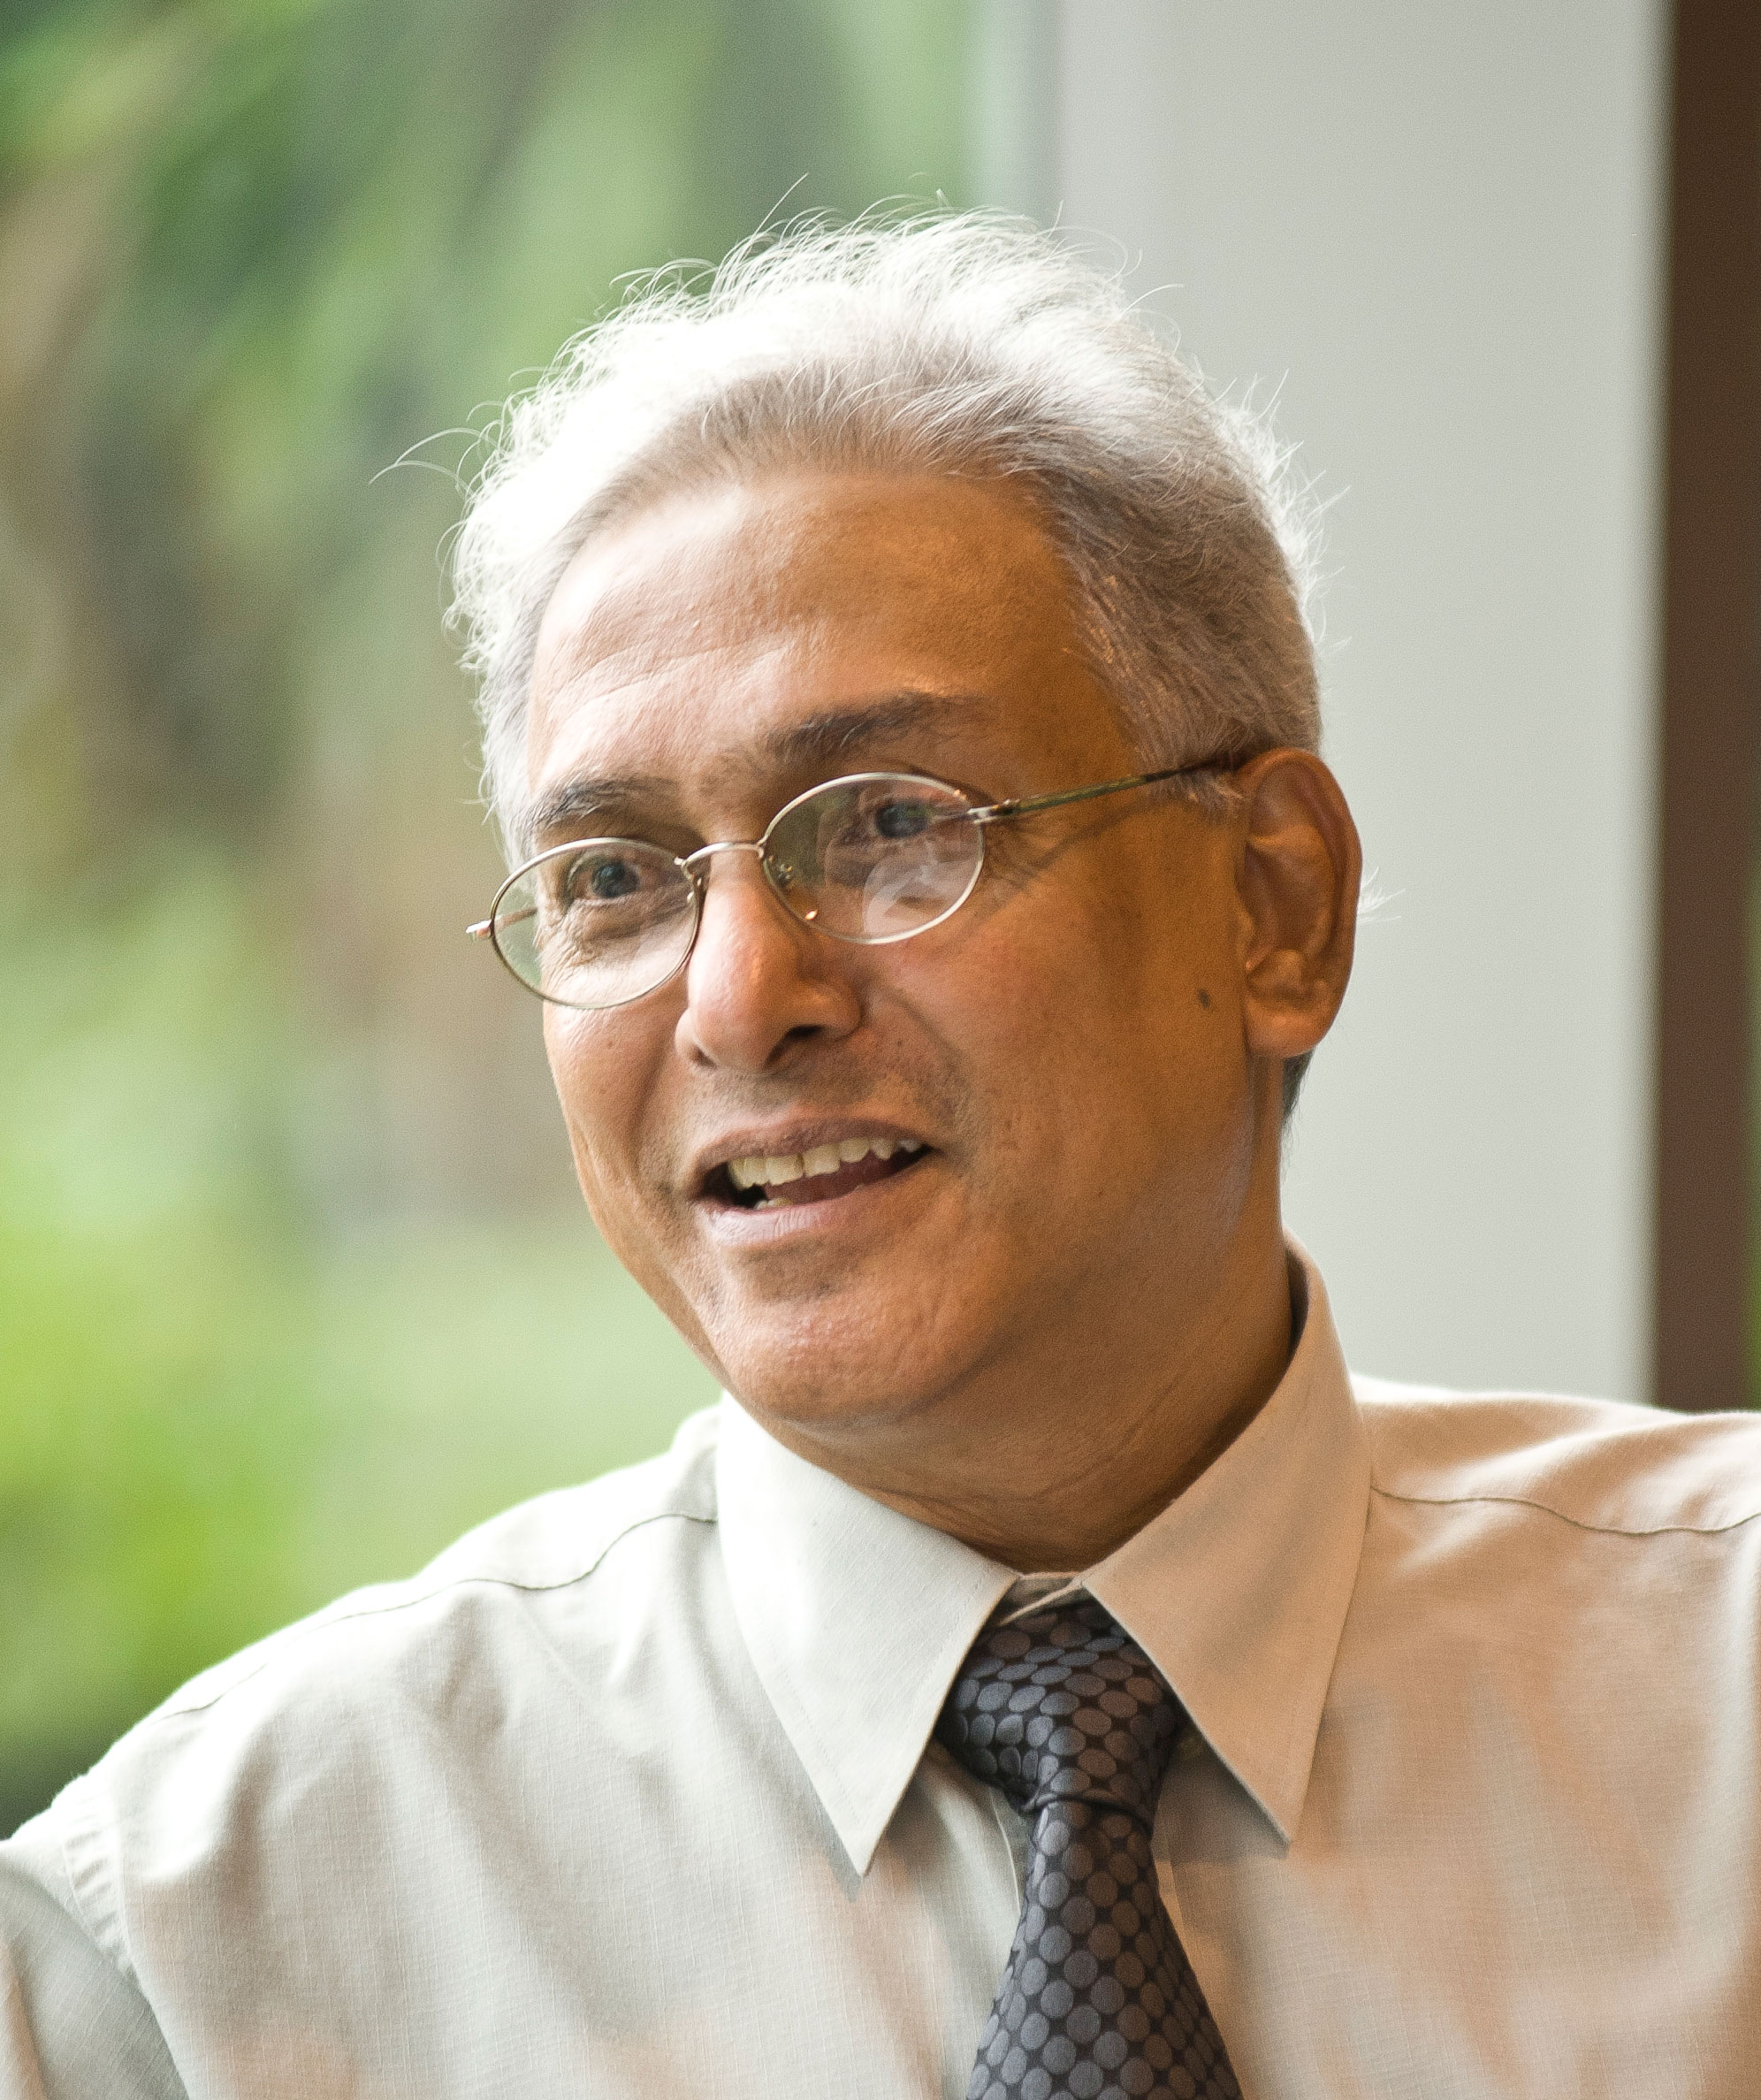 A headshot of smiling Rajeev S Patke who has short grey hair, wearing glasses, a white collared shirt, and a black tie. He is sitting in front of a large window that overlooks greenery in the background.